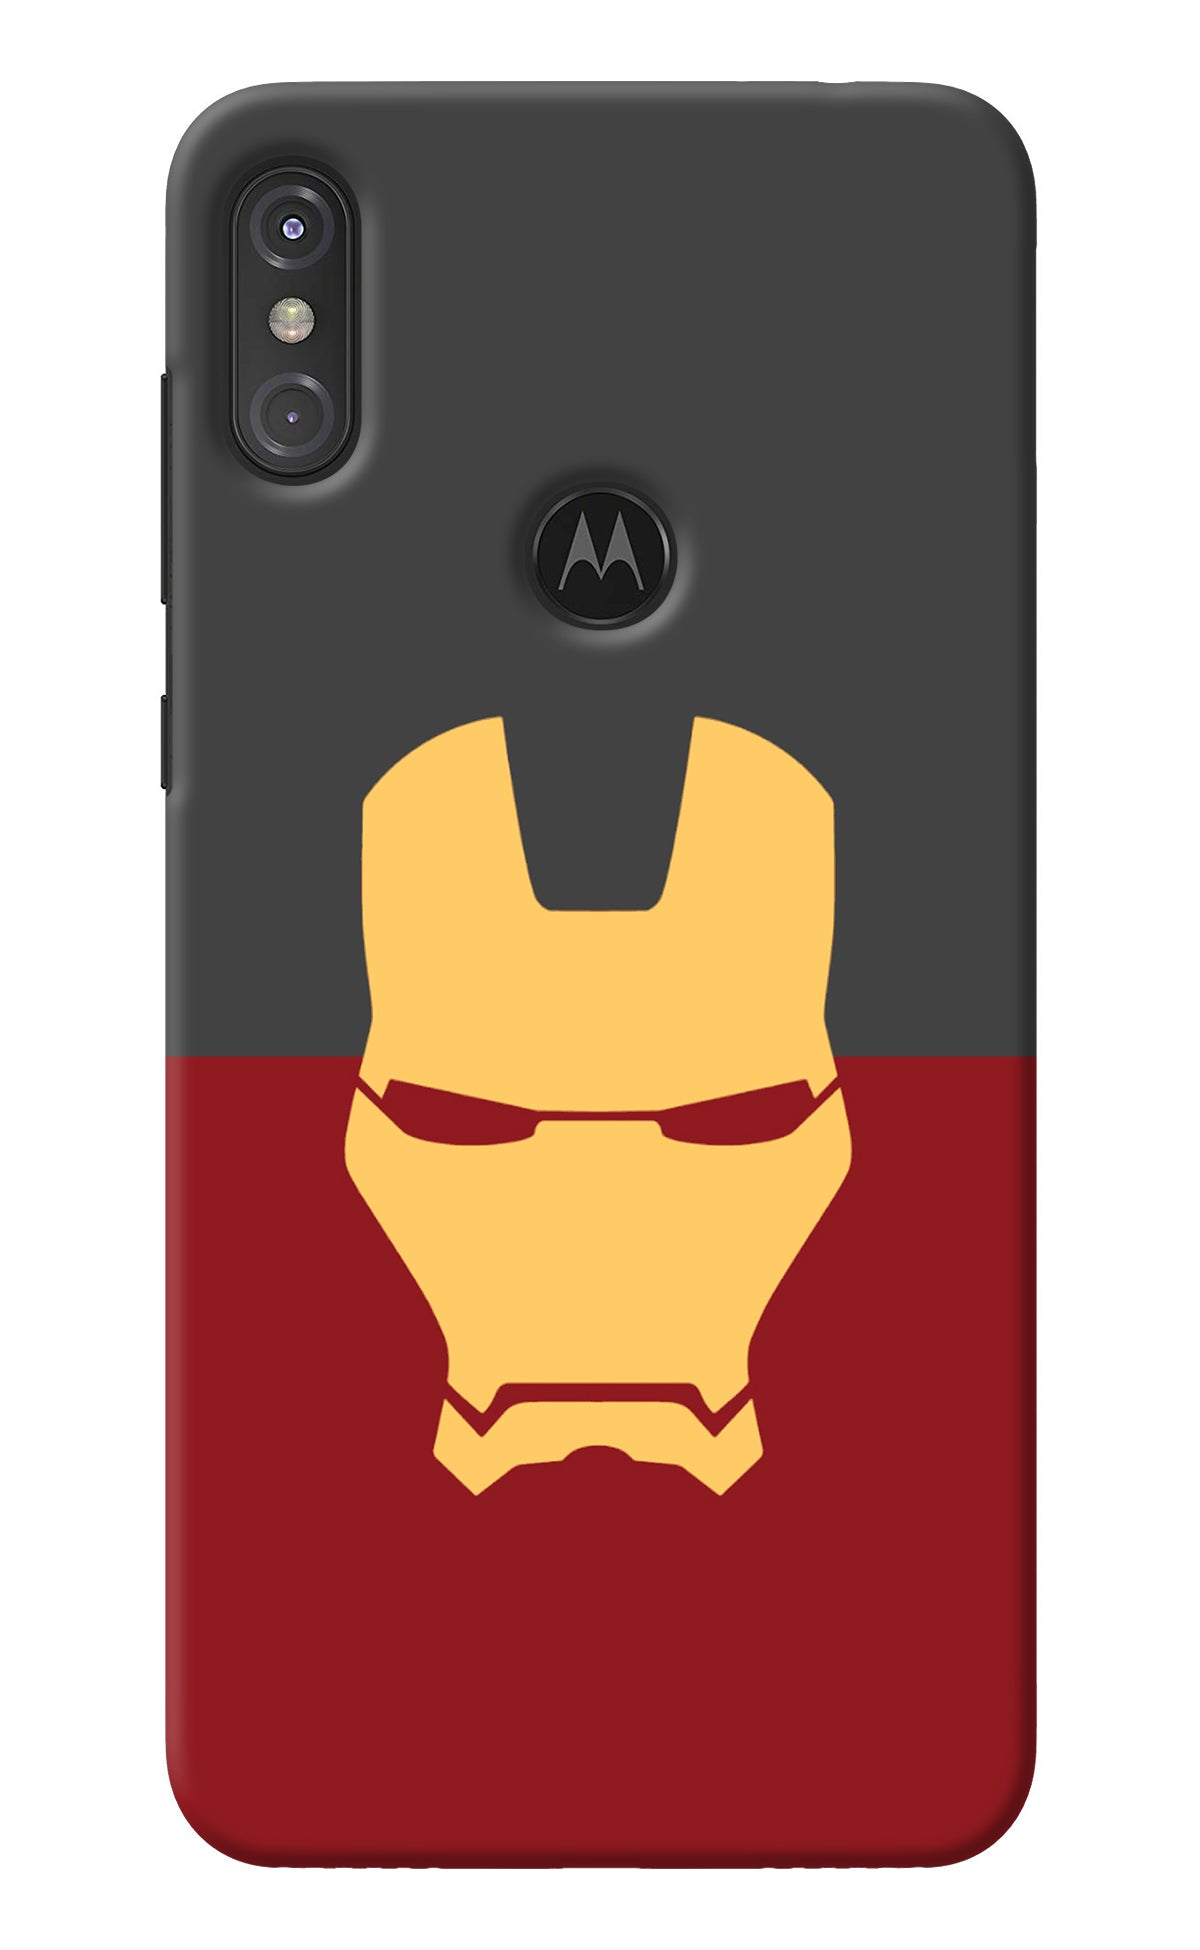 Ironman Moto One Power Back Cover